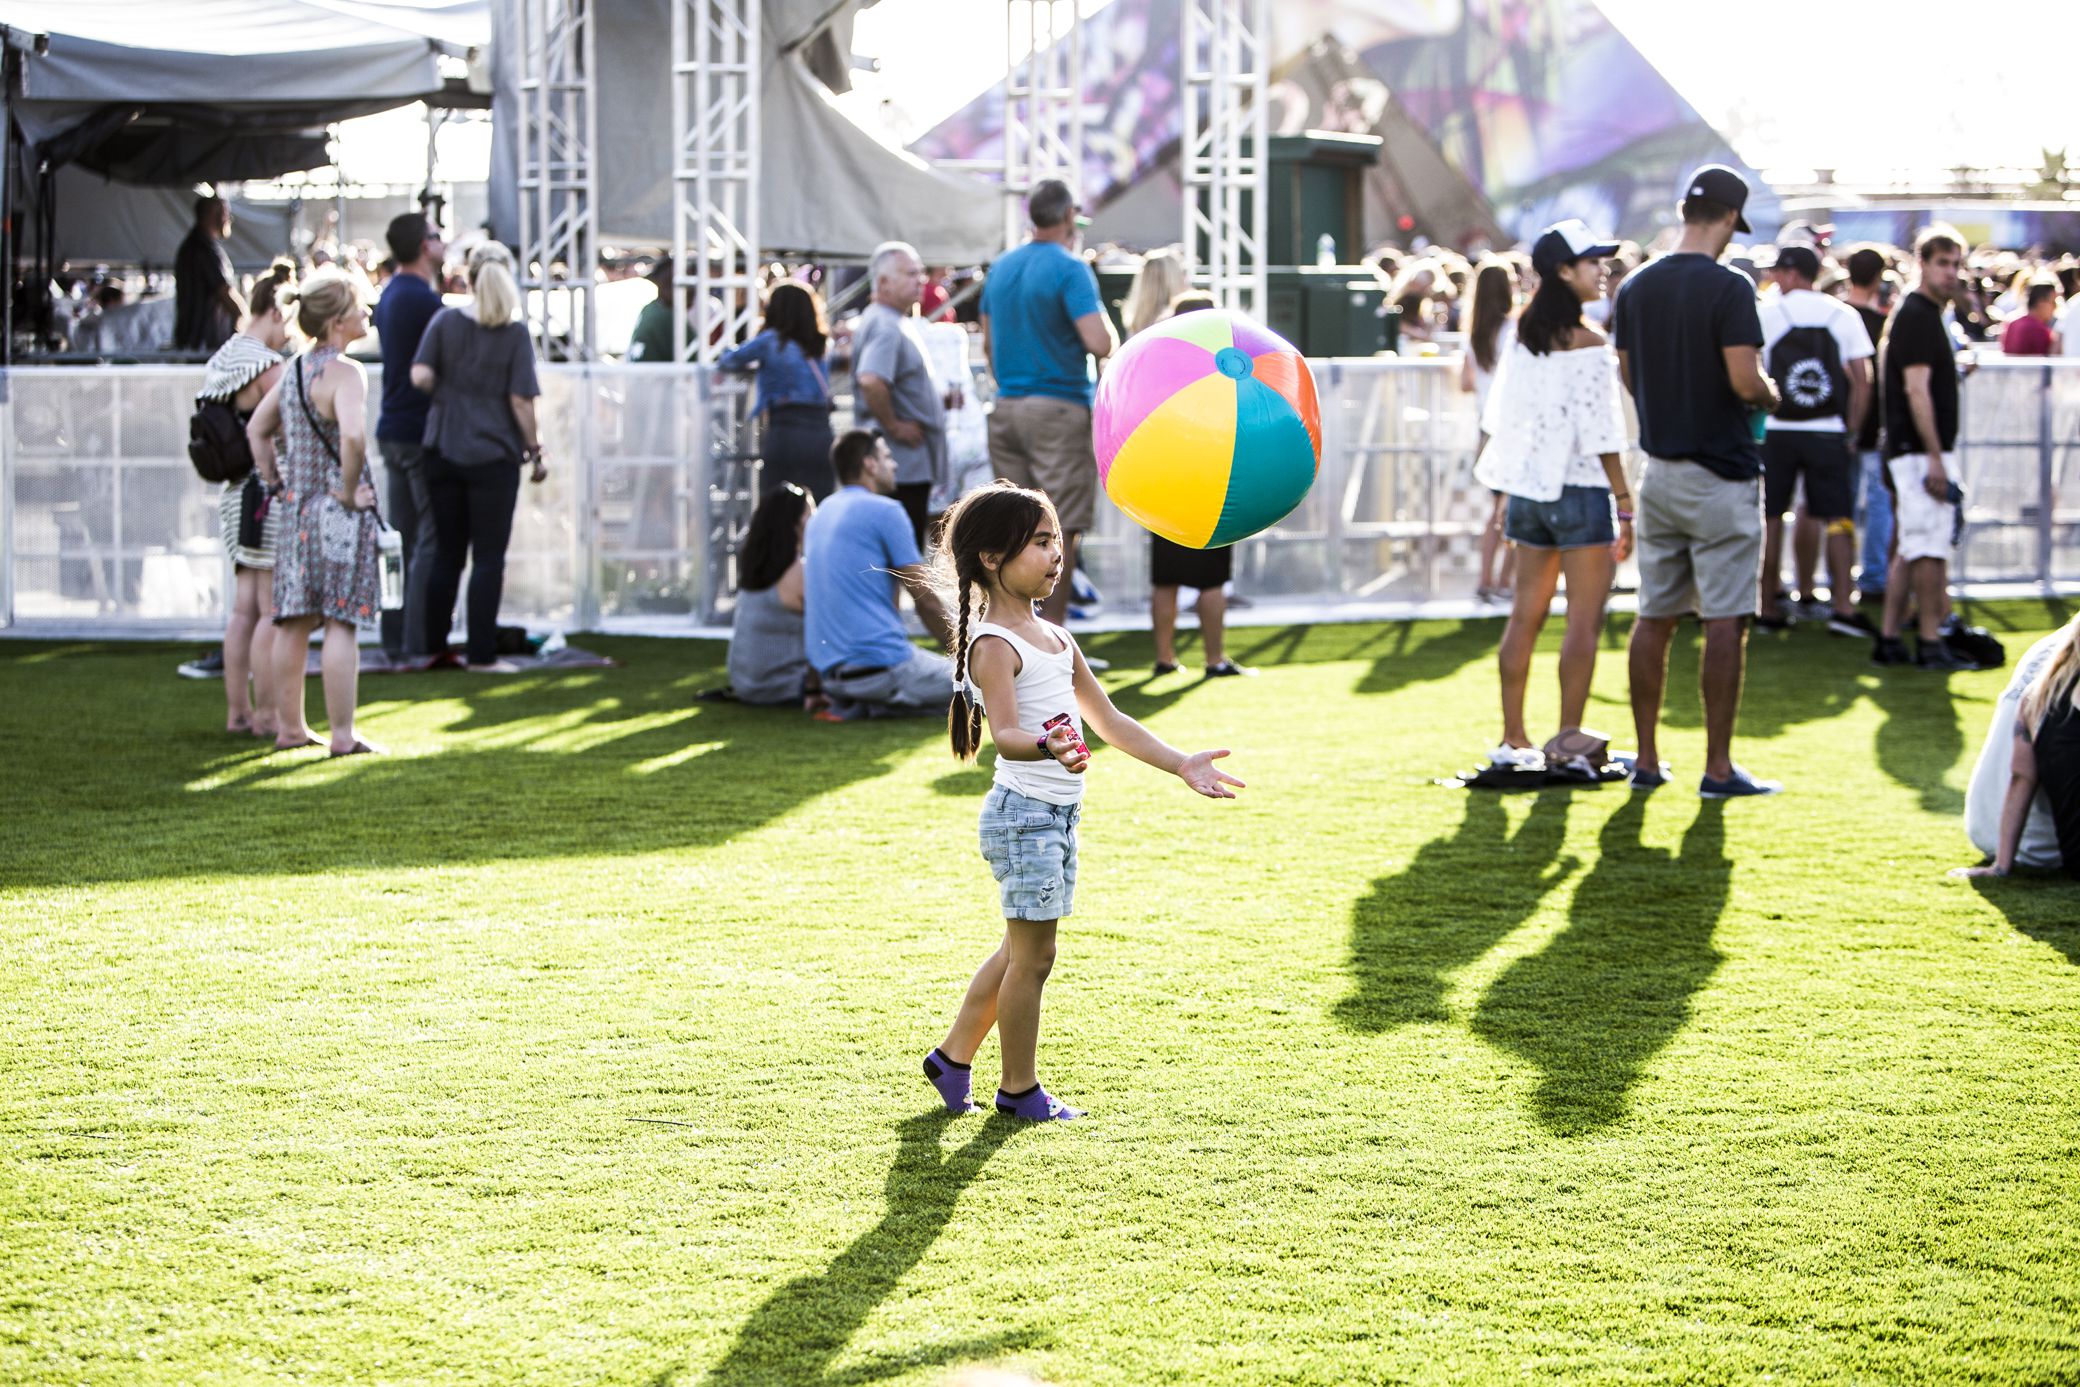 kaaboo 1 5 KAABOO Del Mar Succeeds at Being a Festival for Everyone